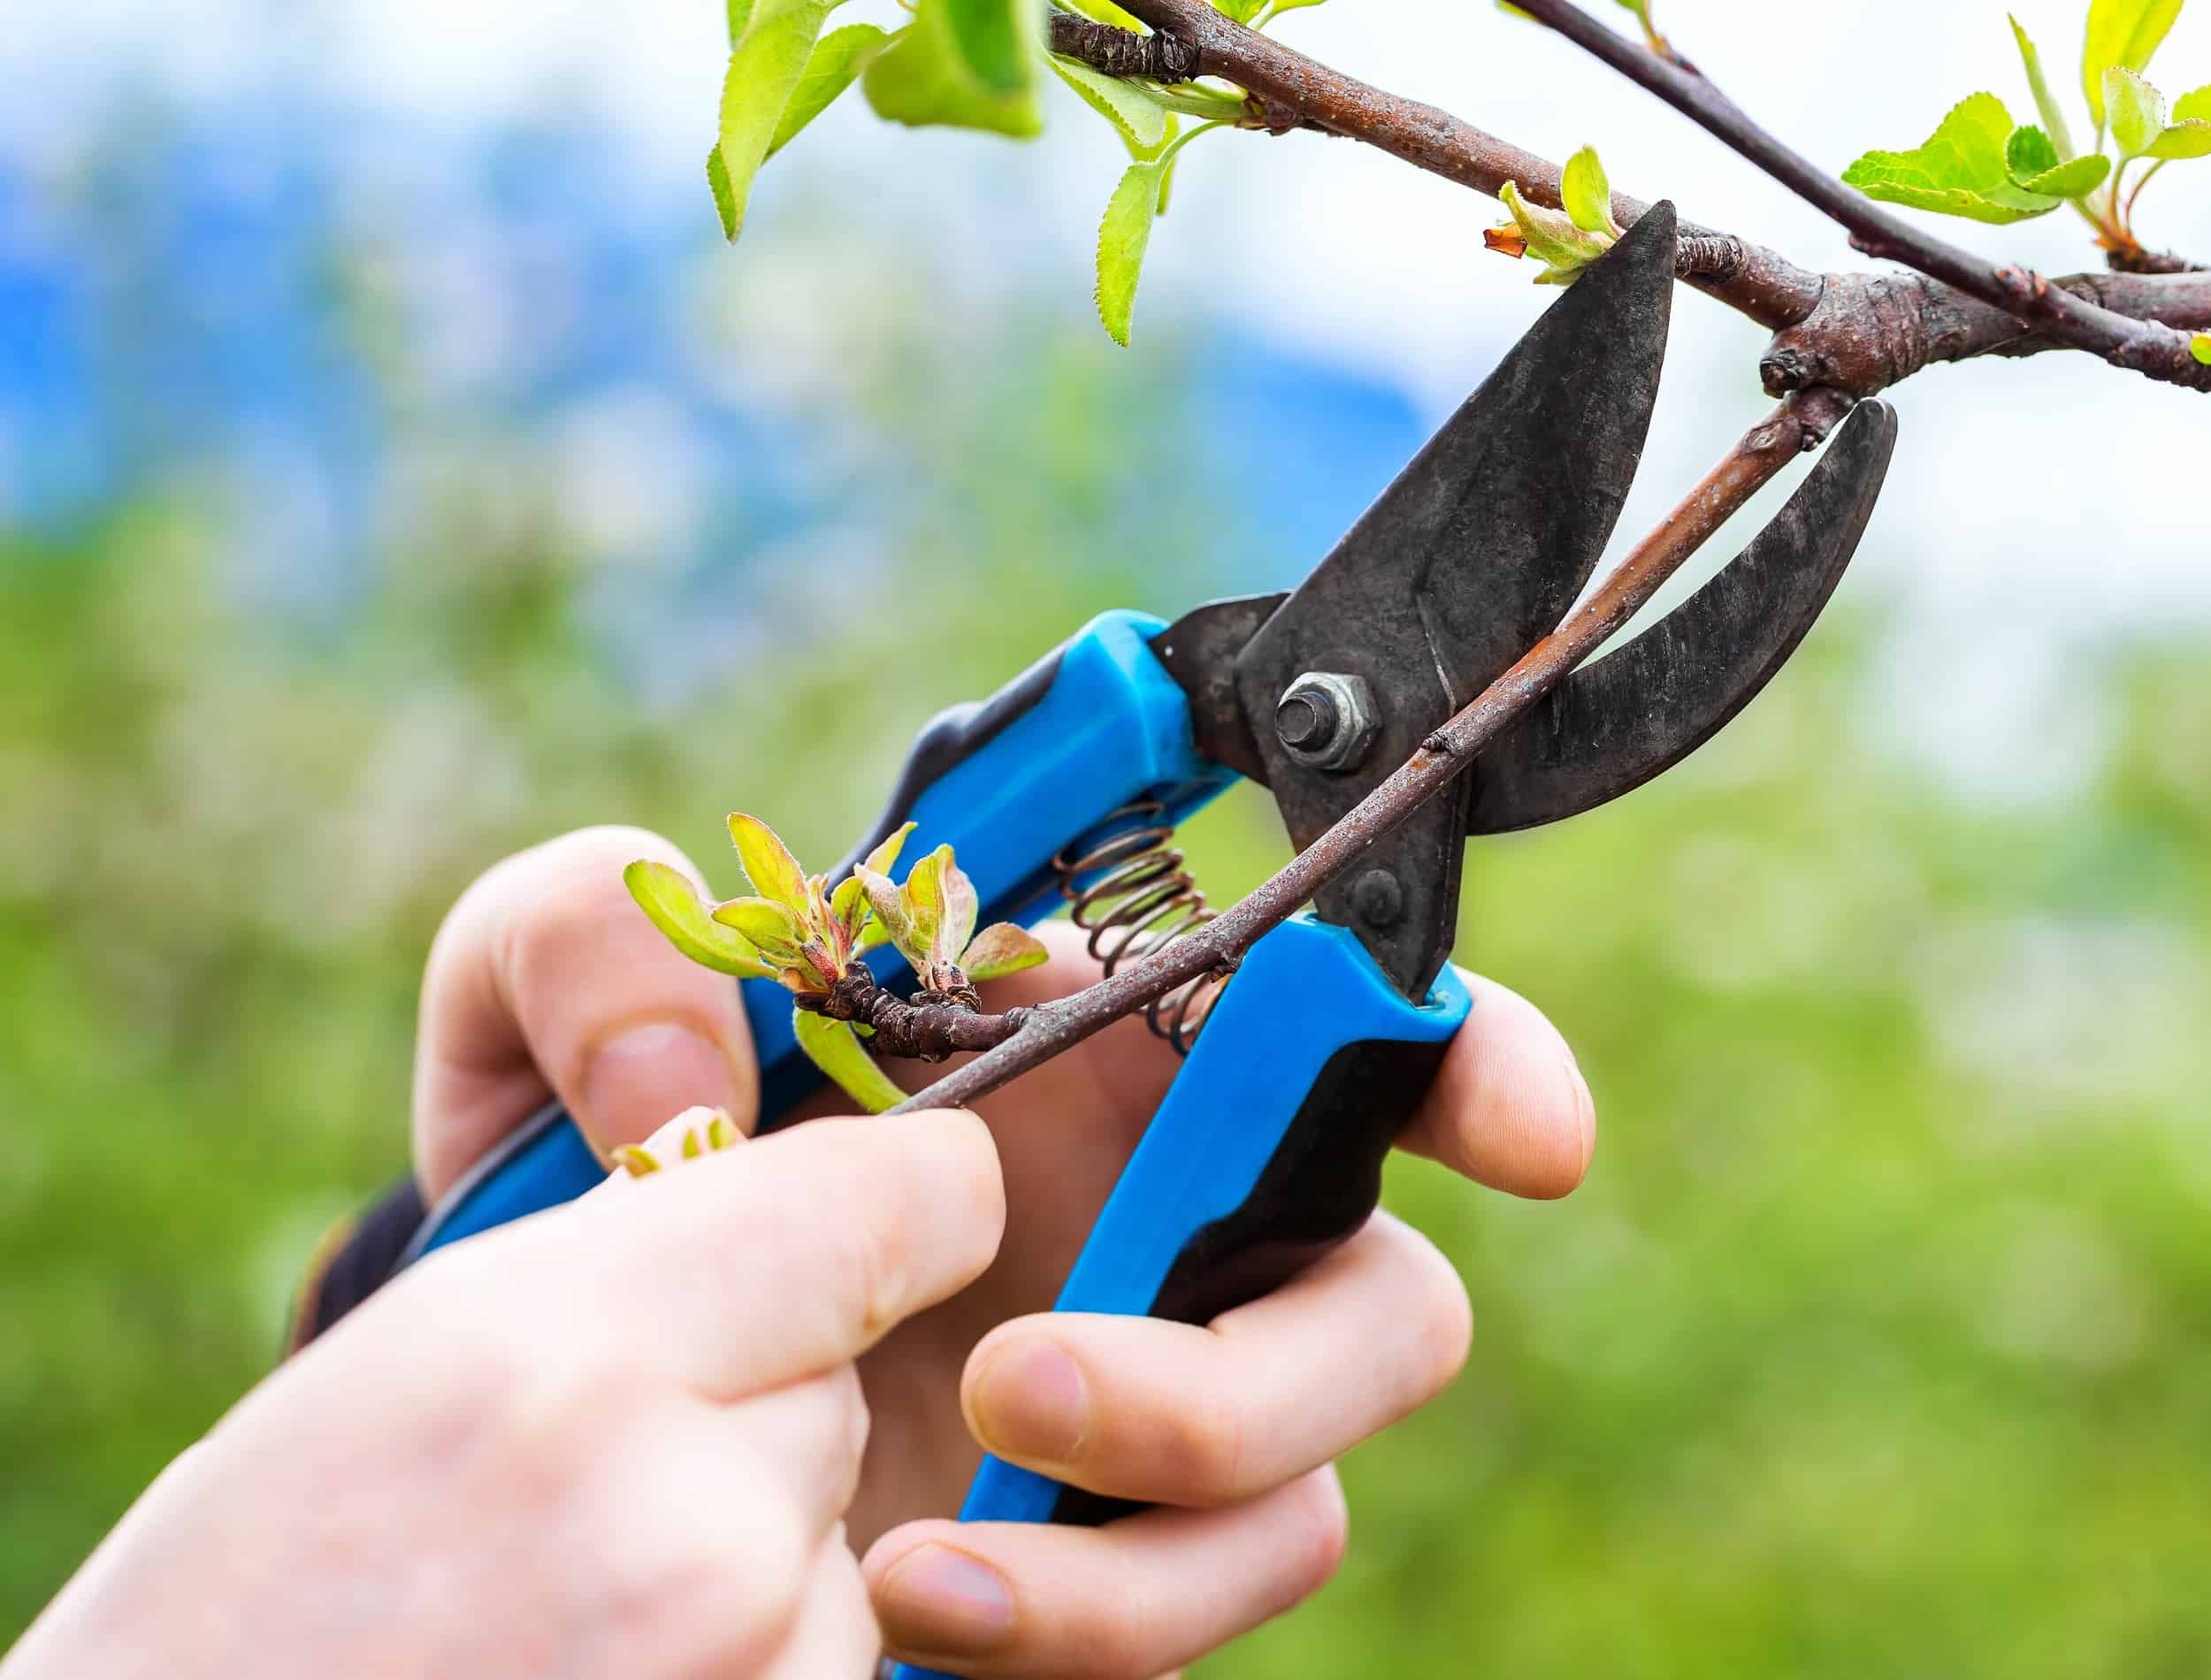 Closeup image of hands with pruner trimming cherry tree branch at summer garden background.